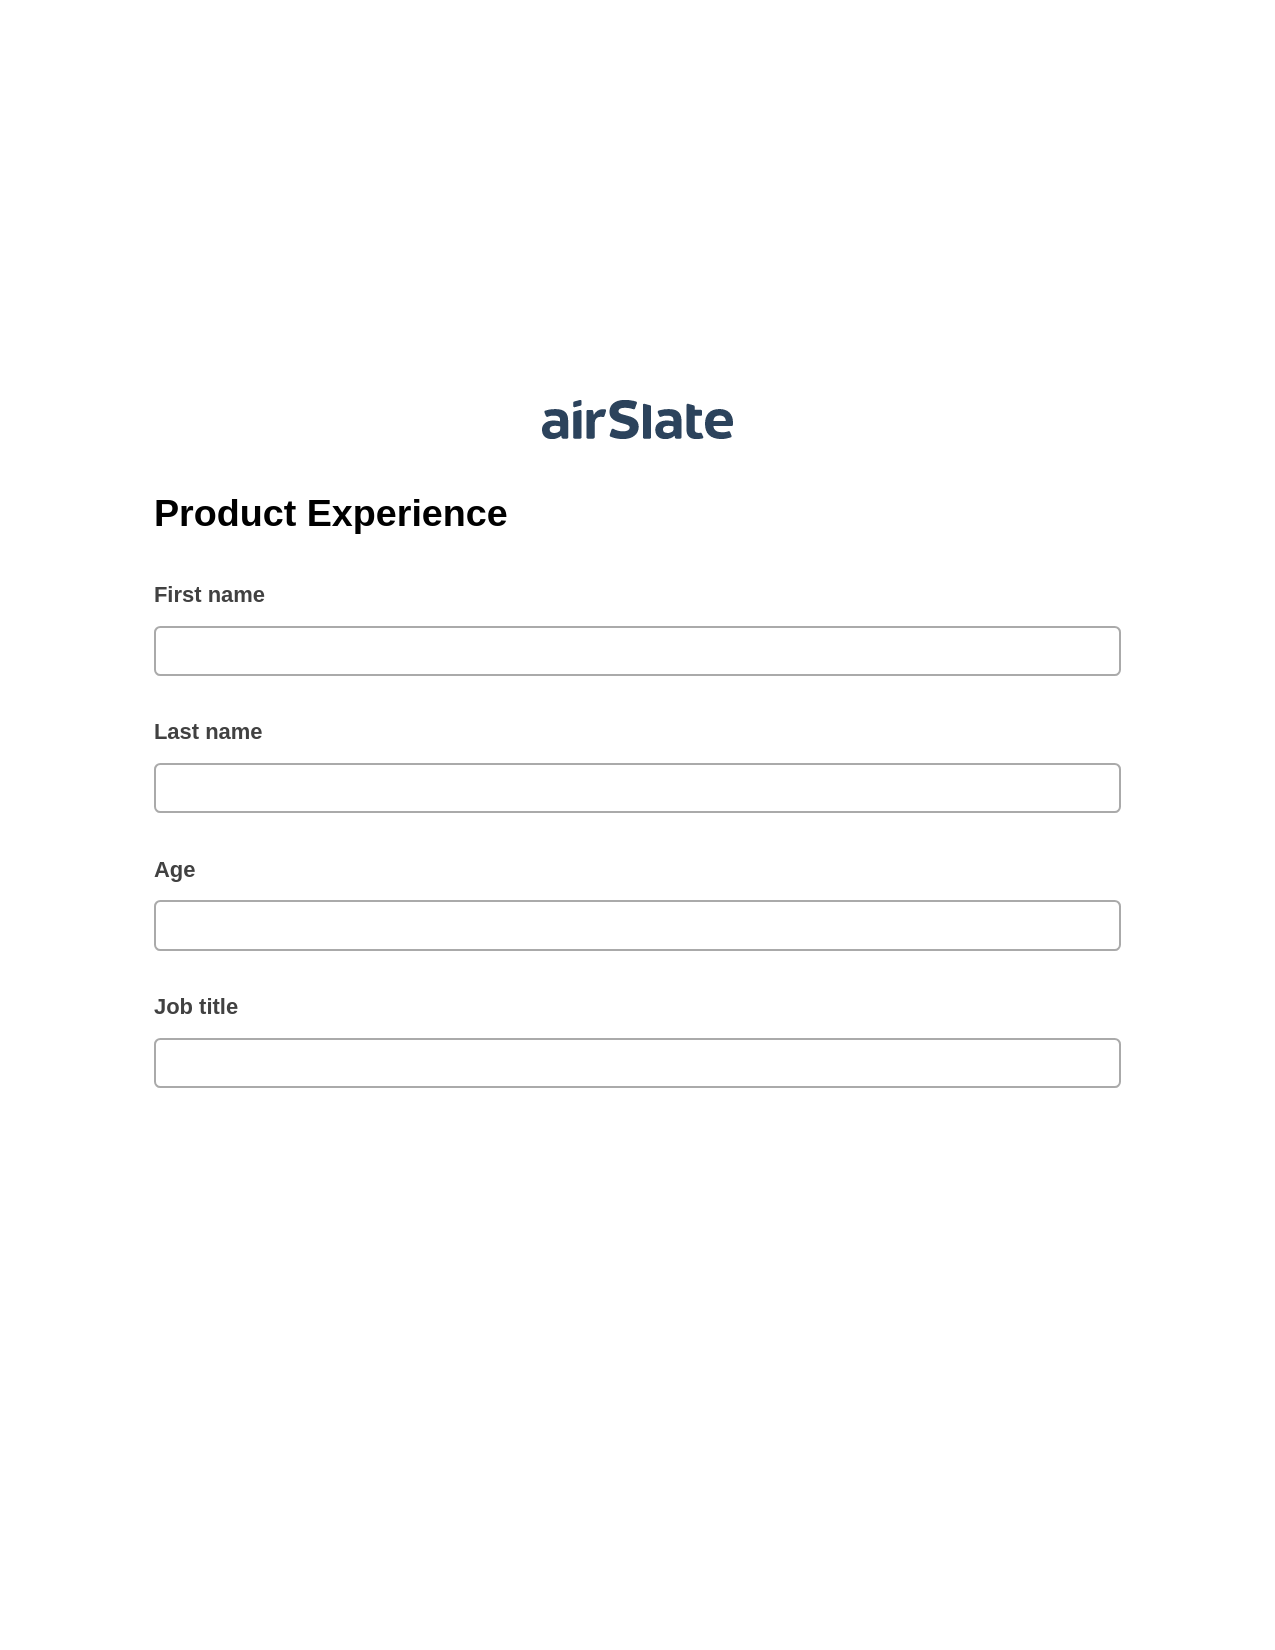 Product Experience Pre-fill from MS Dynamics 365 Records, Create slate addon, Archive to OneDrive Bot